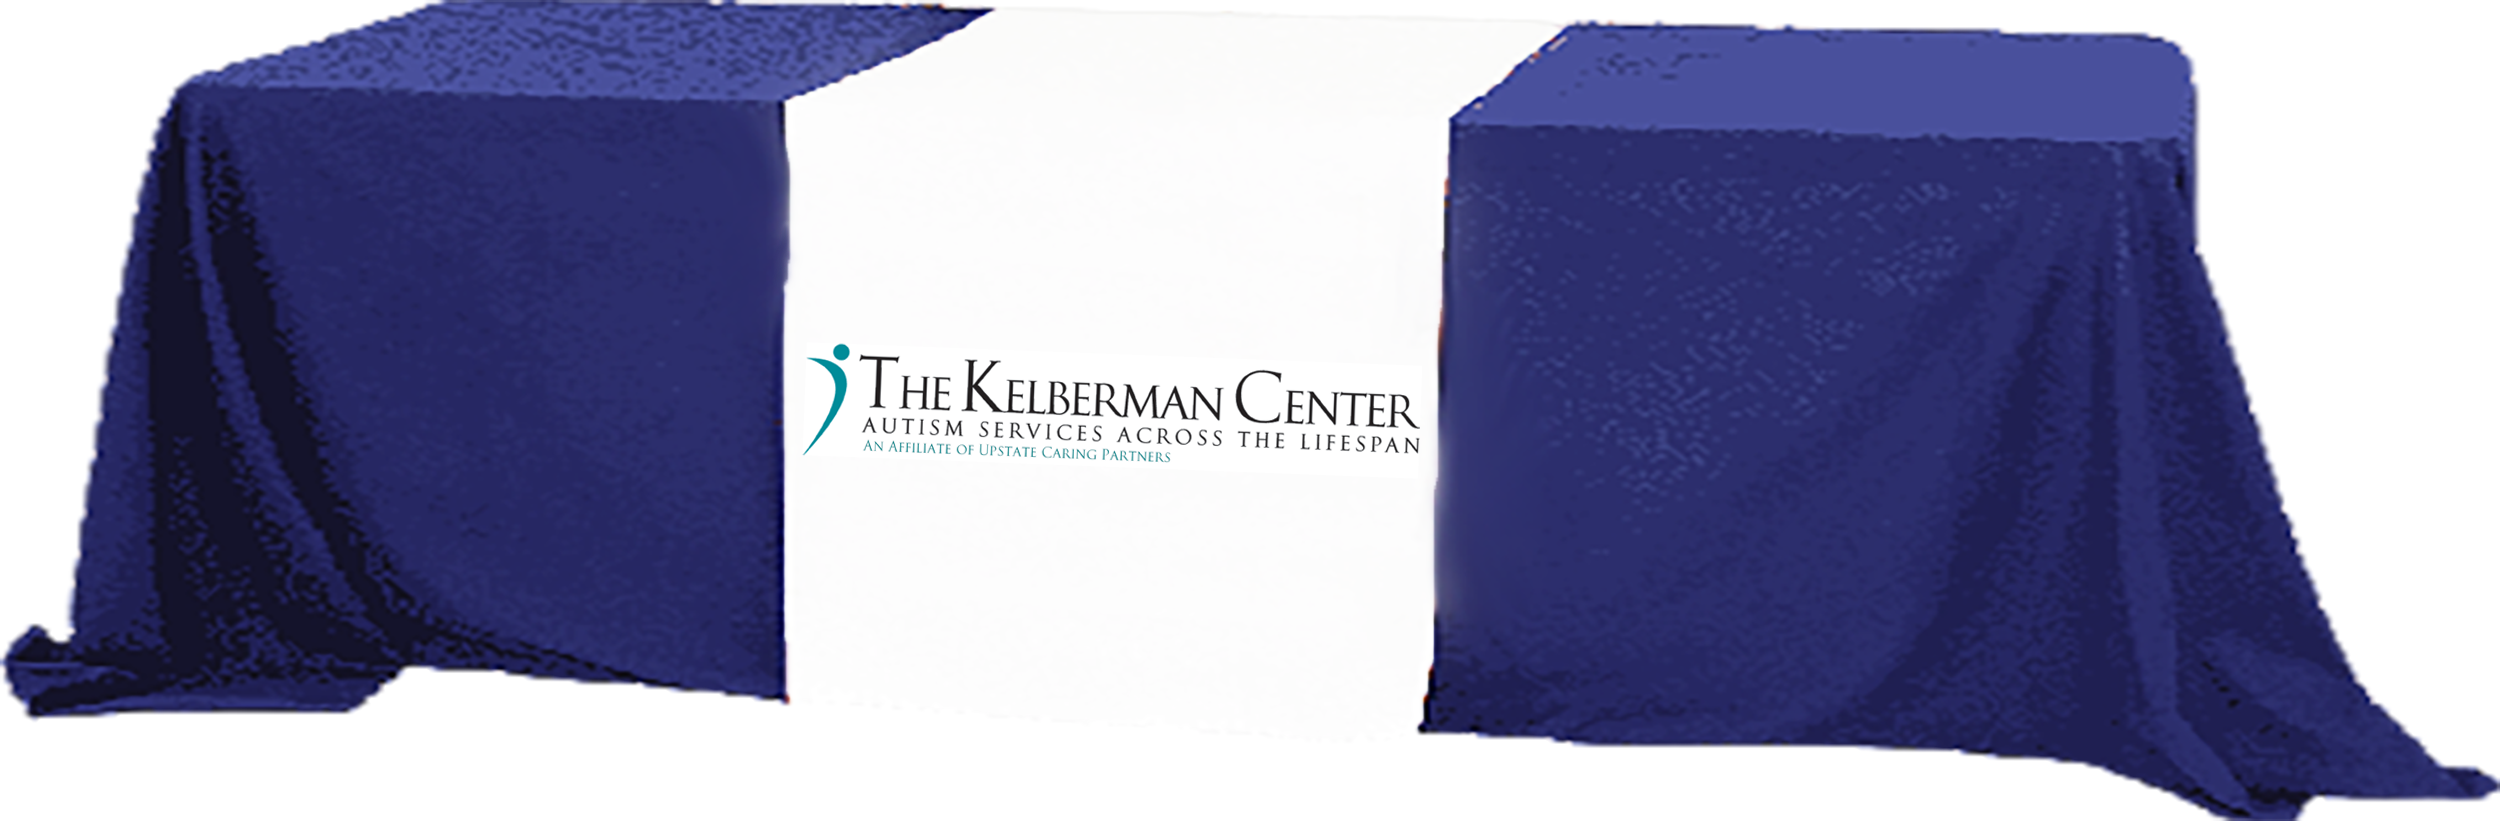 Kelberman Center logo on a table cover over a table image